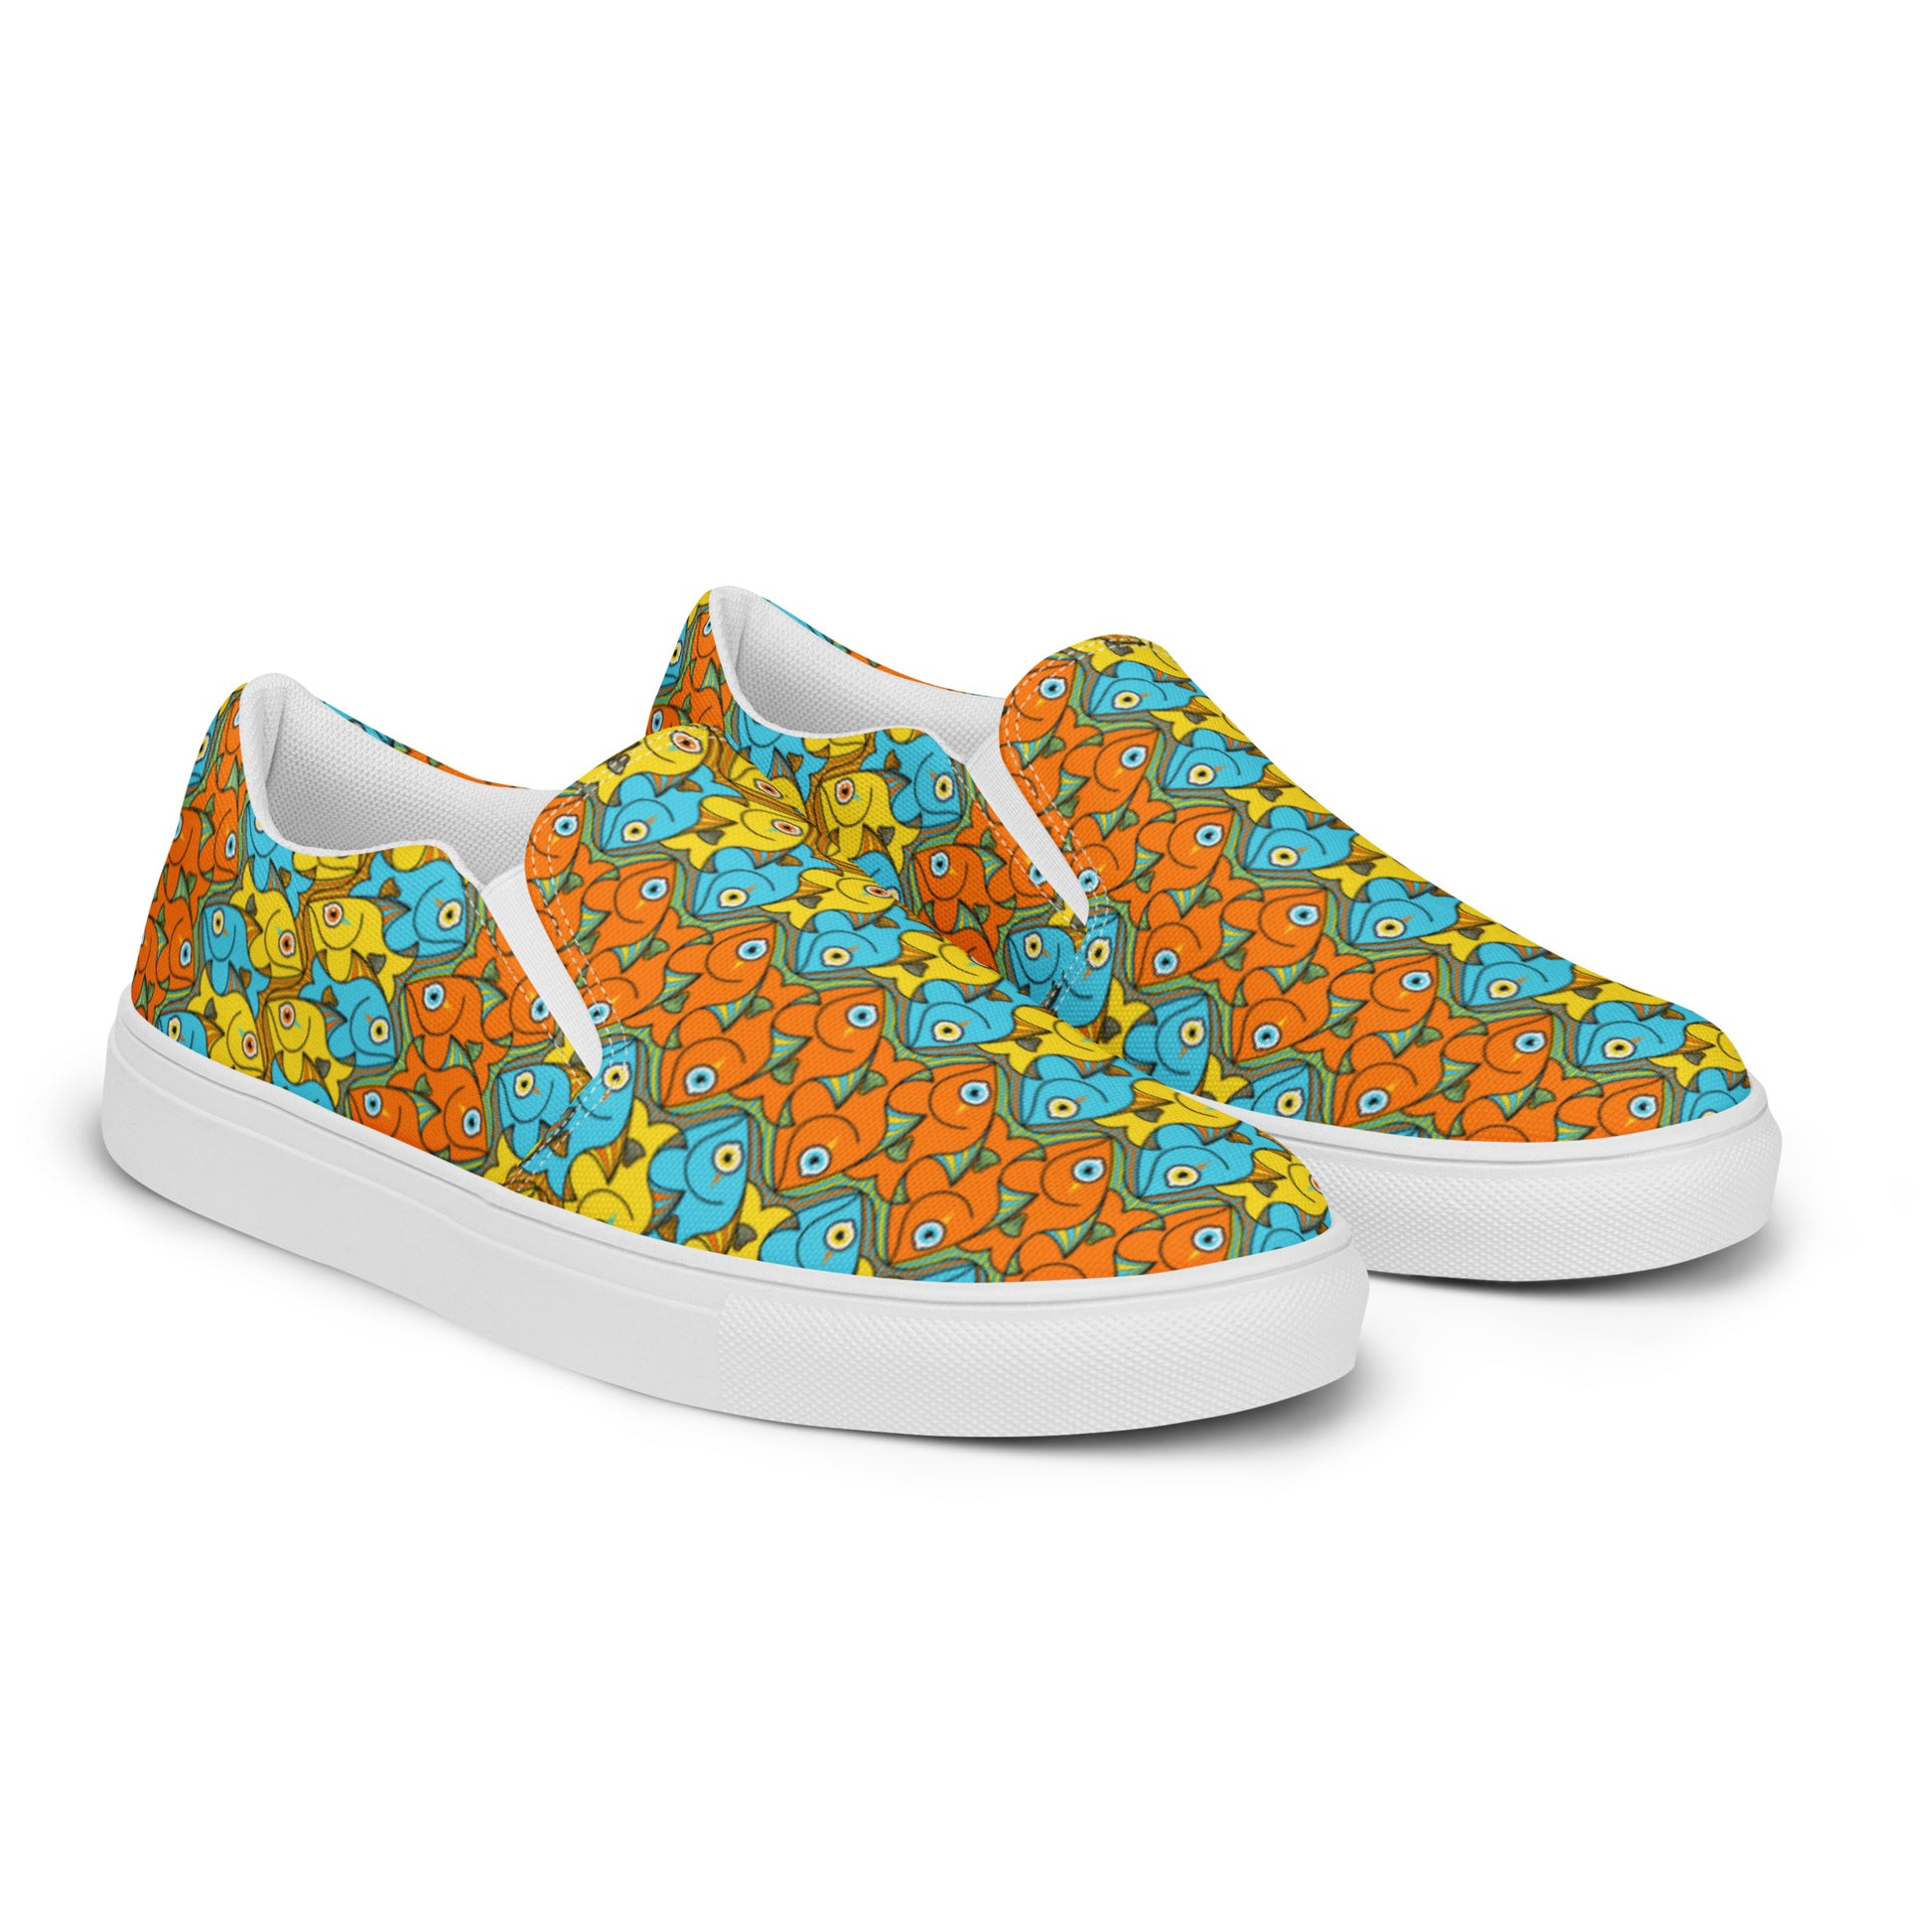 Smiling fishes colorful pattern Women’s slip-on canvas shoes. Overview